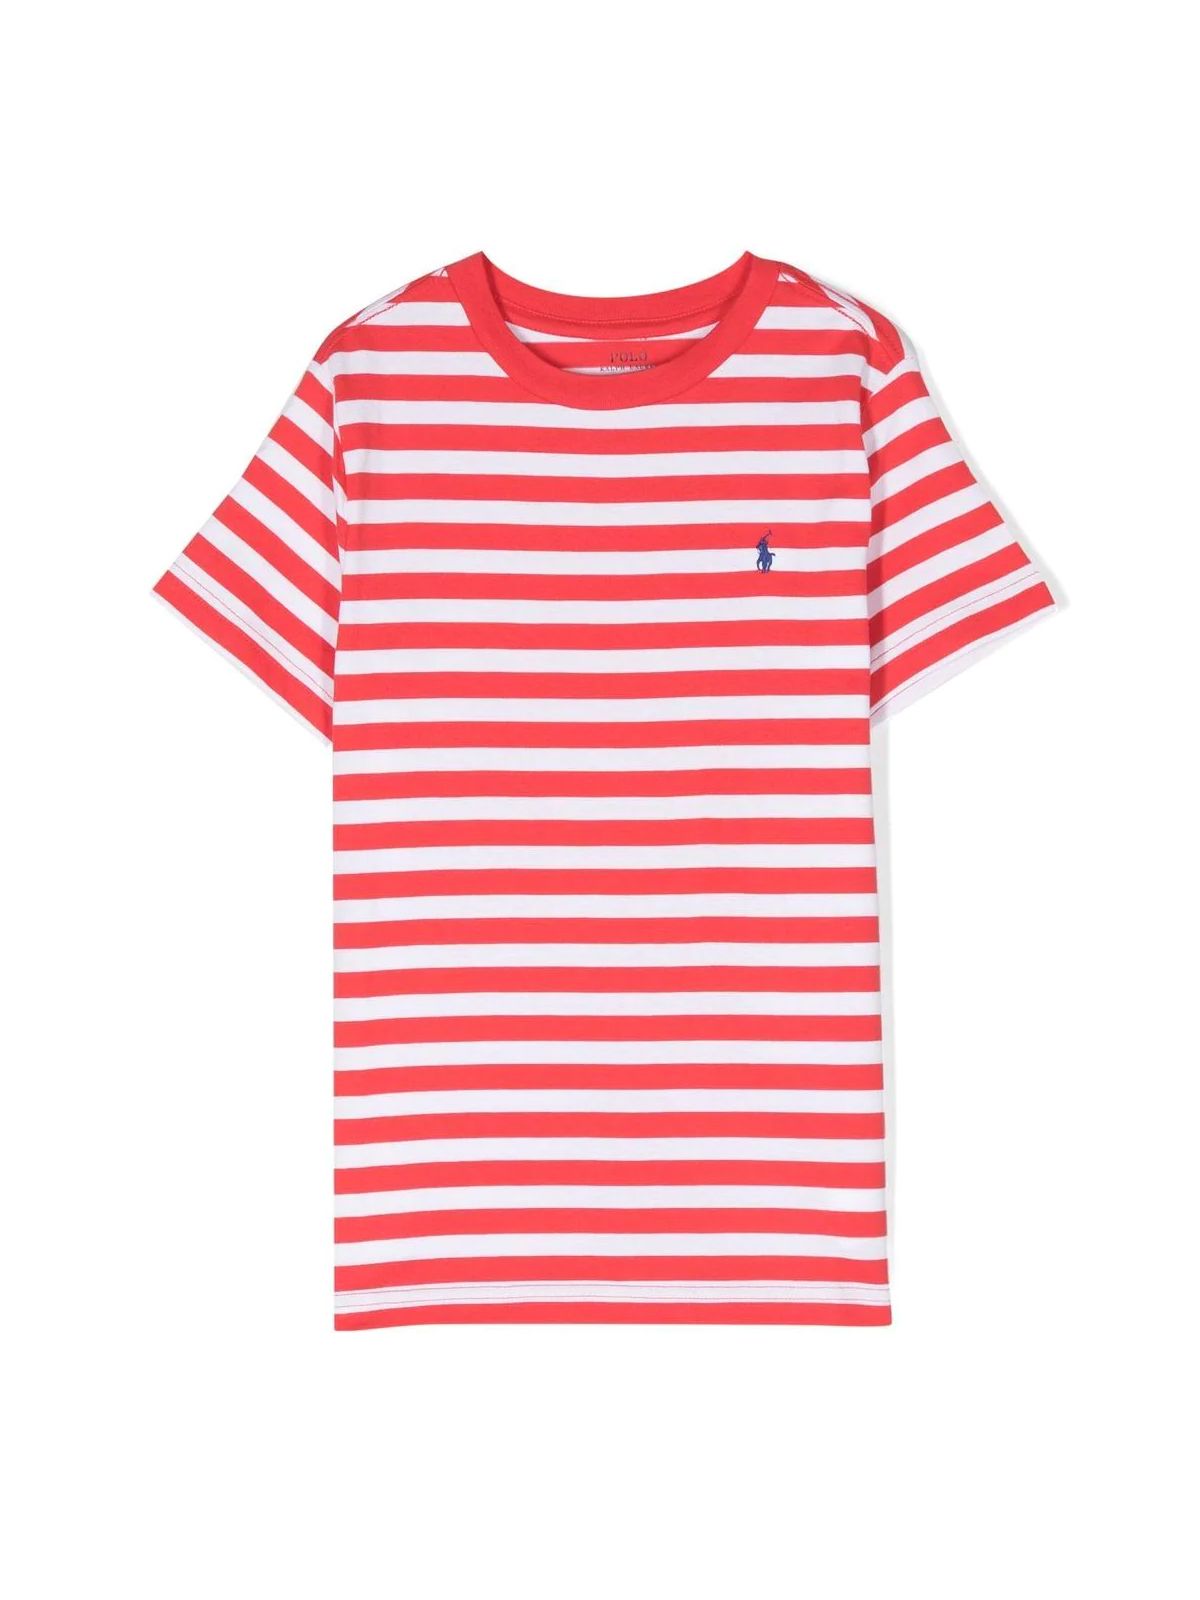 Polo Ralph Lauren Ssydcn M1 Knit Shirts Tshirt In Red Reef White